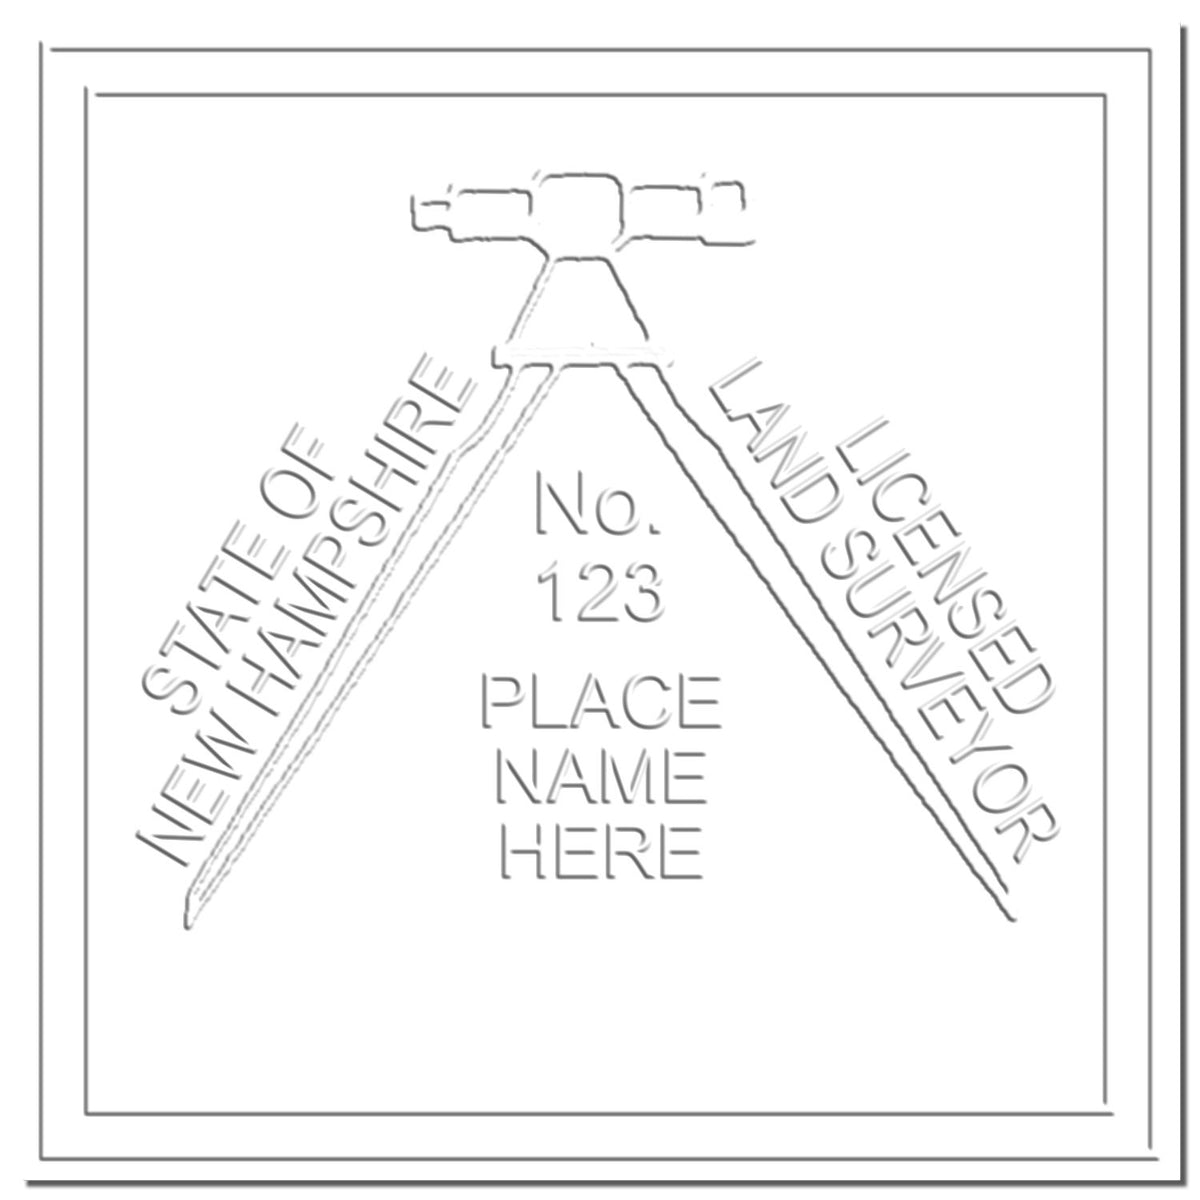 This paper is stamped with a sample imprint of the Gift New Hampshire Land Surveyor Seal, signifying its quality and reliability.